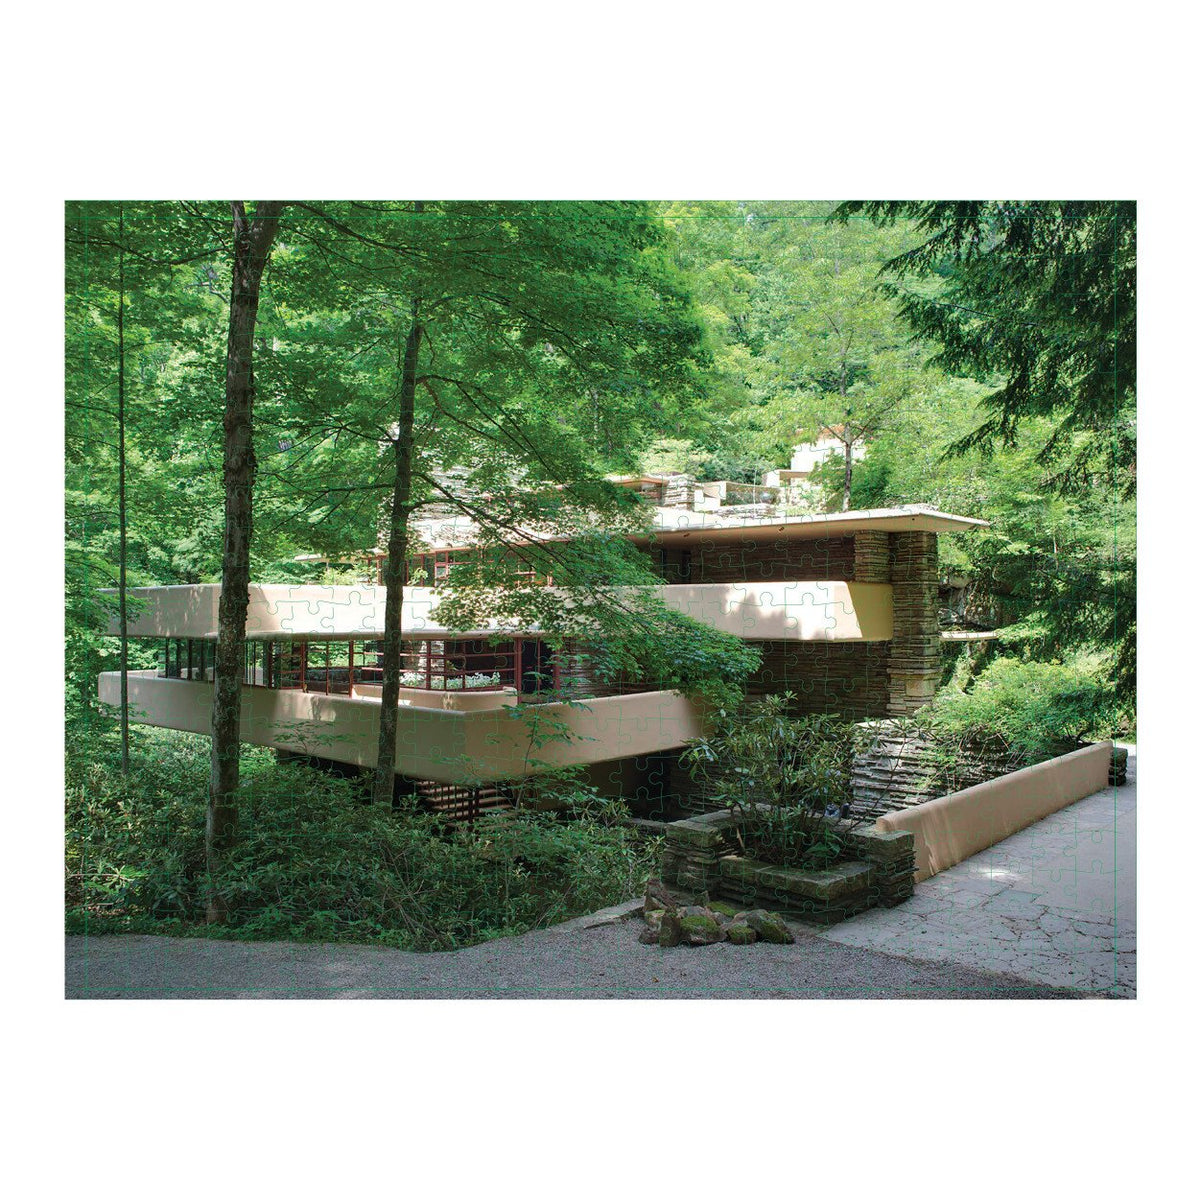 Frank Lloyd Wright Fallingwater 2-sided 500 Piece Puzzle - Quick Ship - Puzzlicious.com